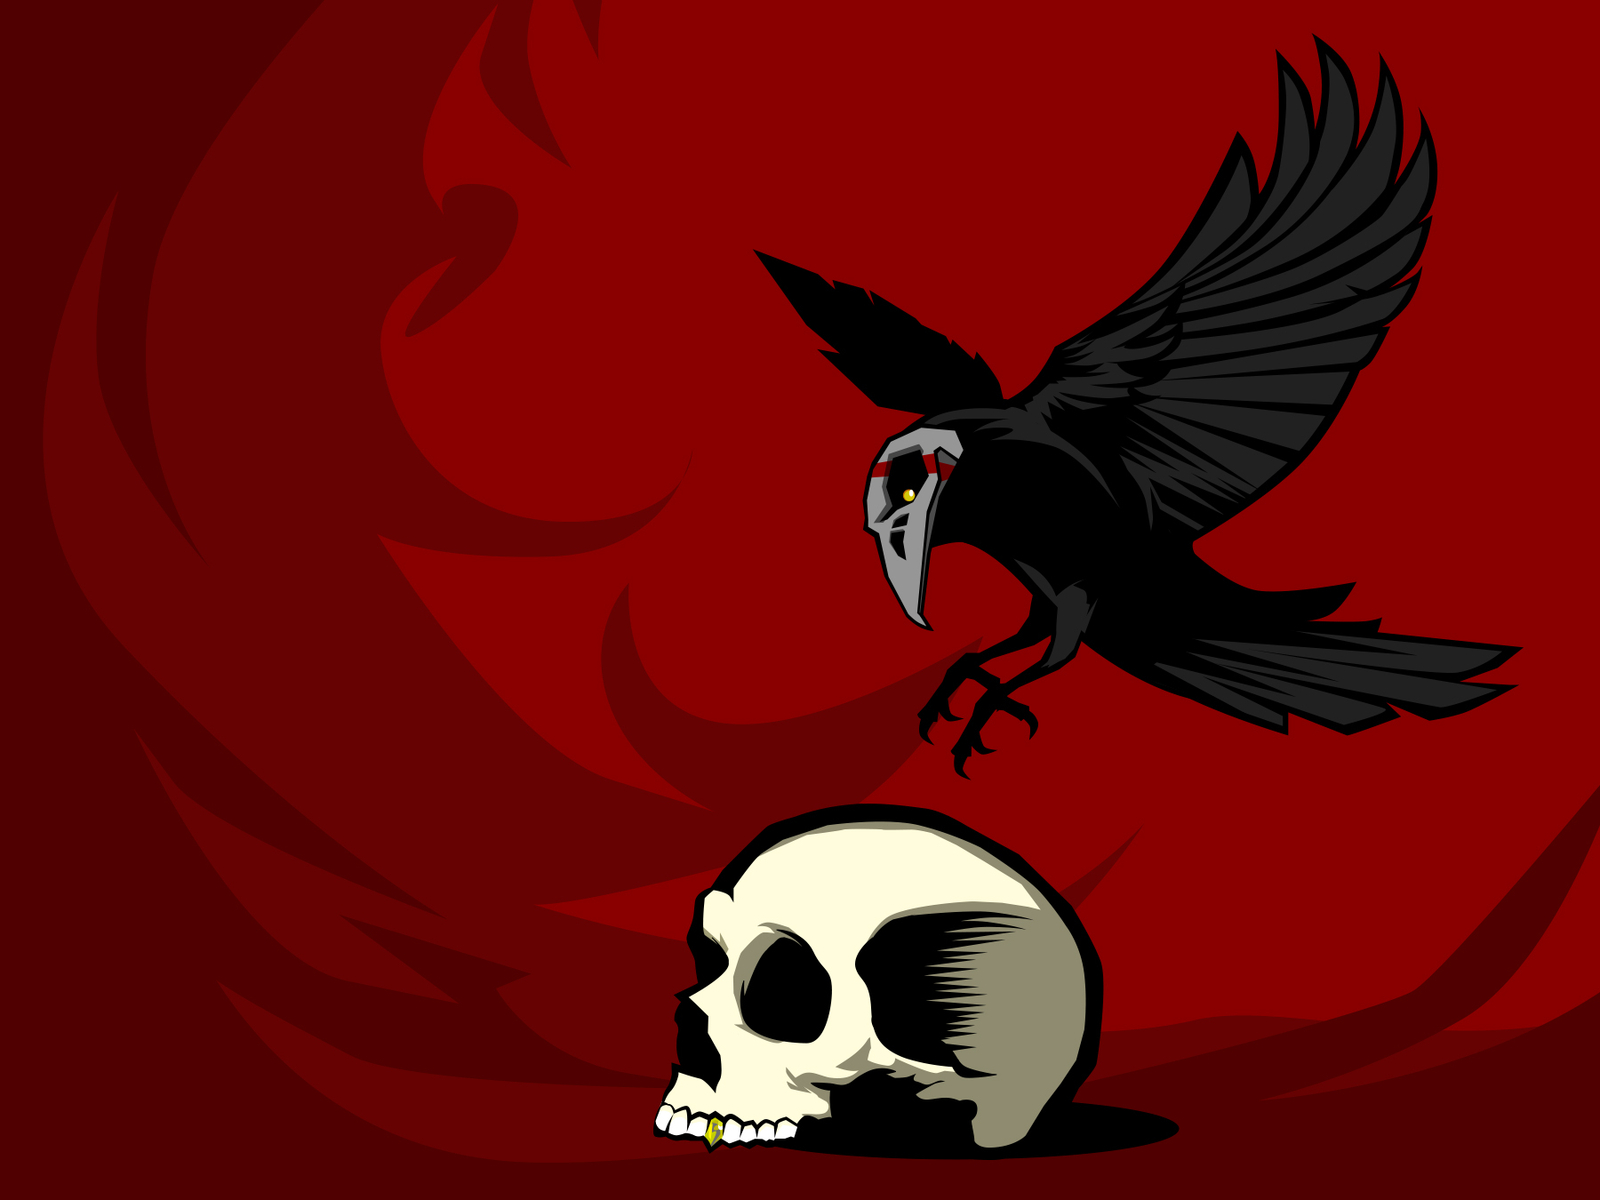 Skull Crow Composition By Nathan Cavitt On Dribbble